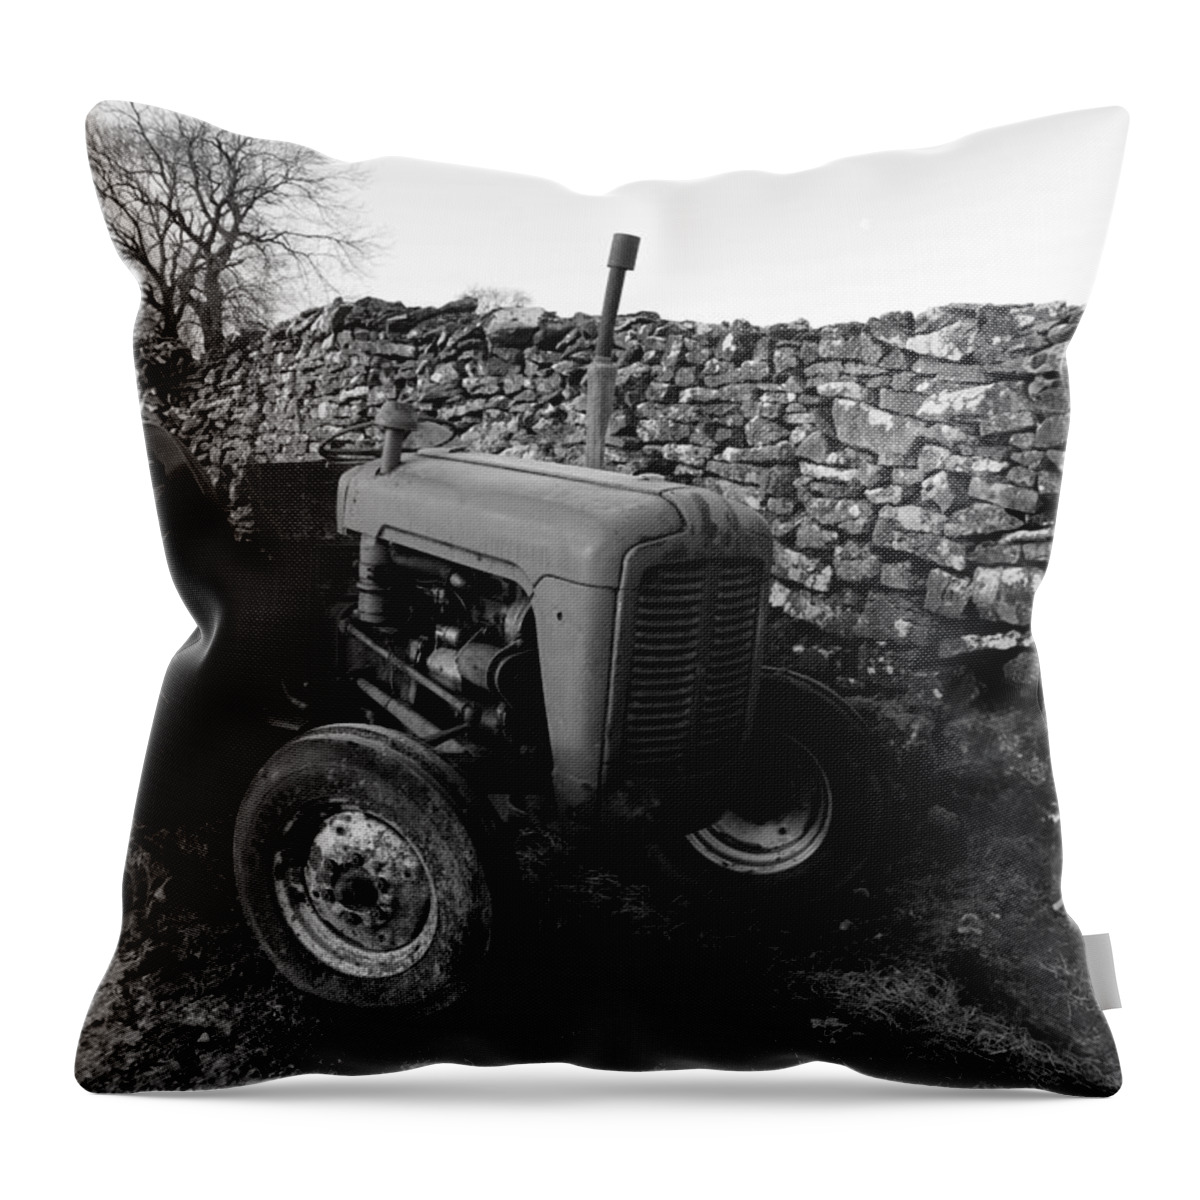 Old Throw Pillow featuring the photograph The Old Tractor black and white by Lukasz Ryszka